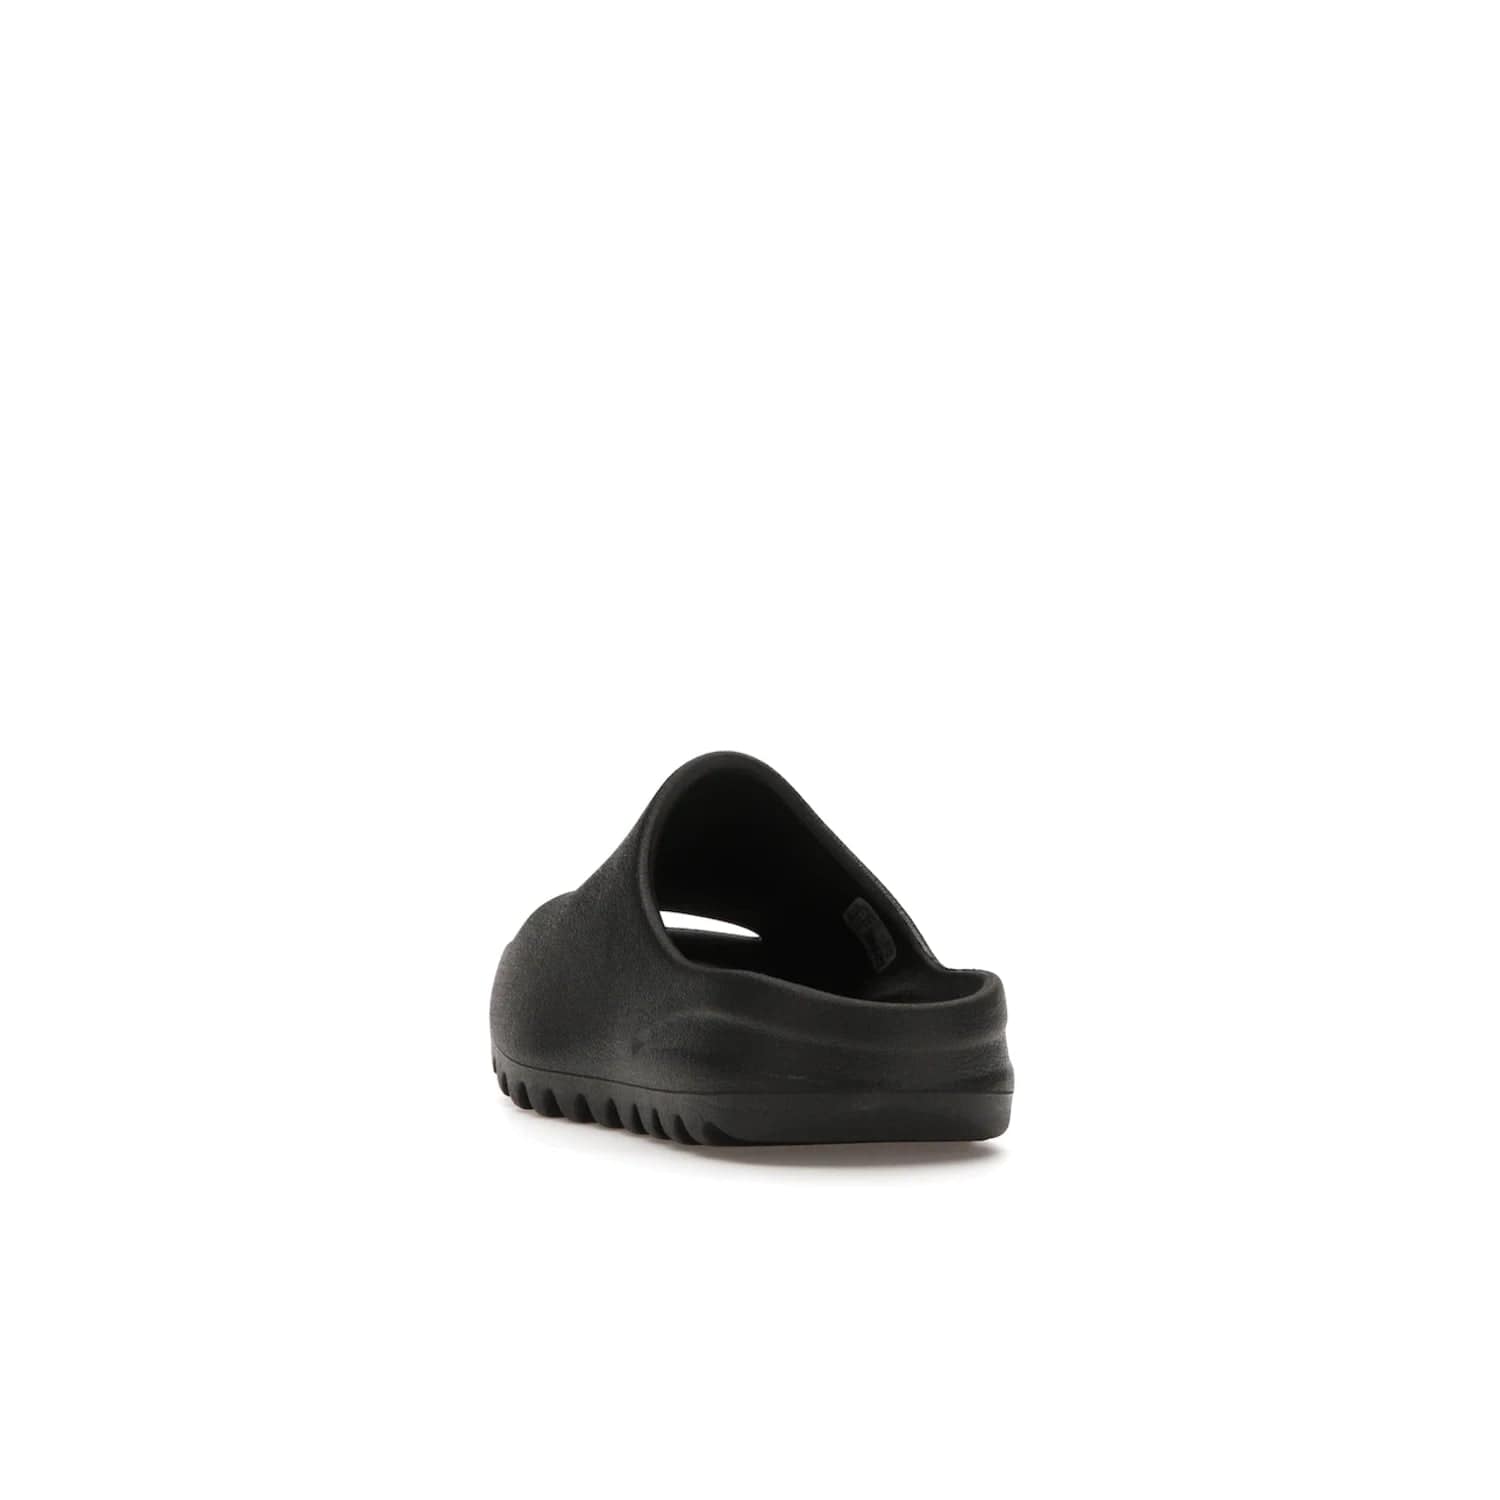 adidas Yeezy Slide Onyx (Kids) - Image 26 - Only at www.BallersClubKickz.com - adidas Yeezy Slide Onyx (Kids): Comfortable foam construction with textured surface and iconic three-stripe logo. Breathable, open-toe design and deep grooves for traction. Released in March 2021 at $50.